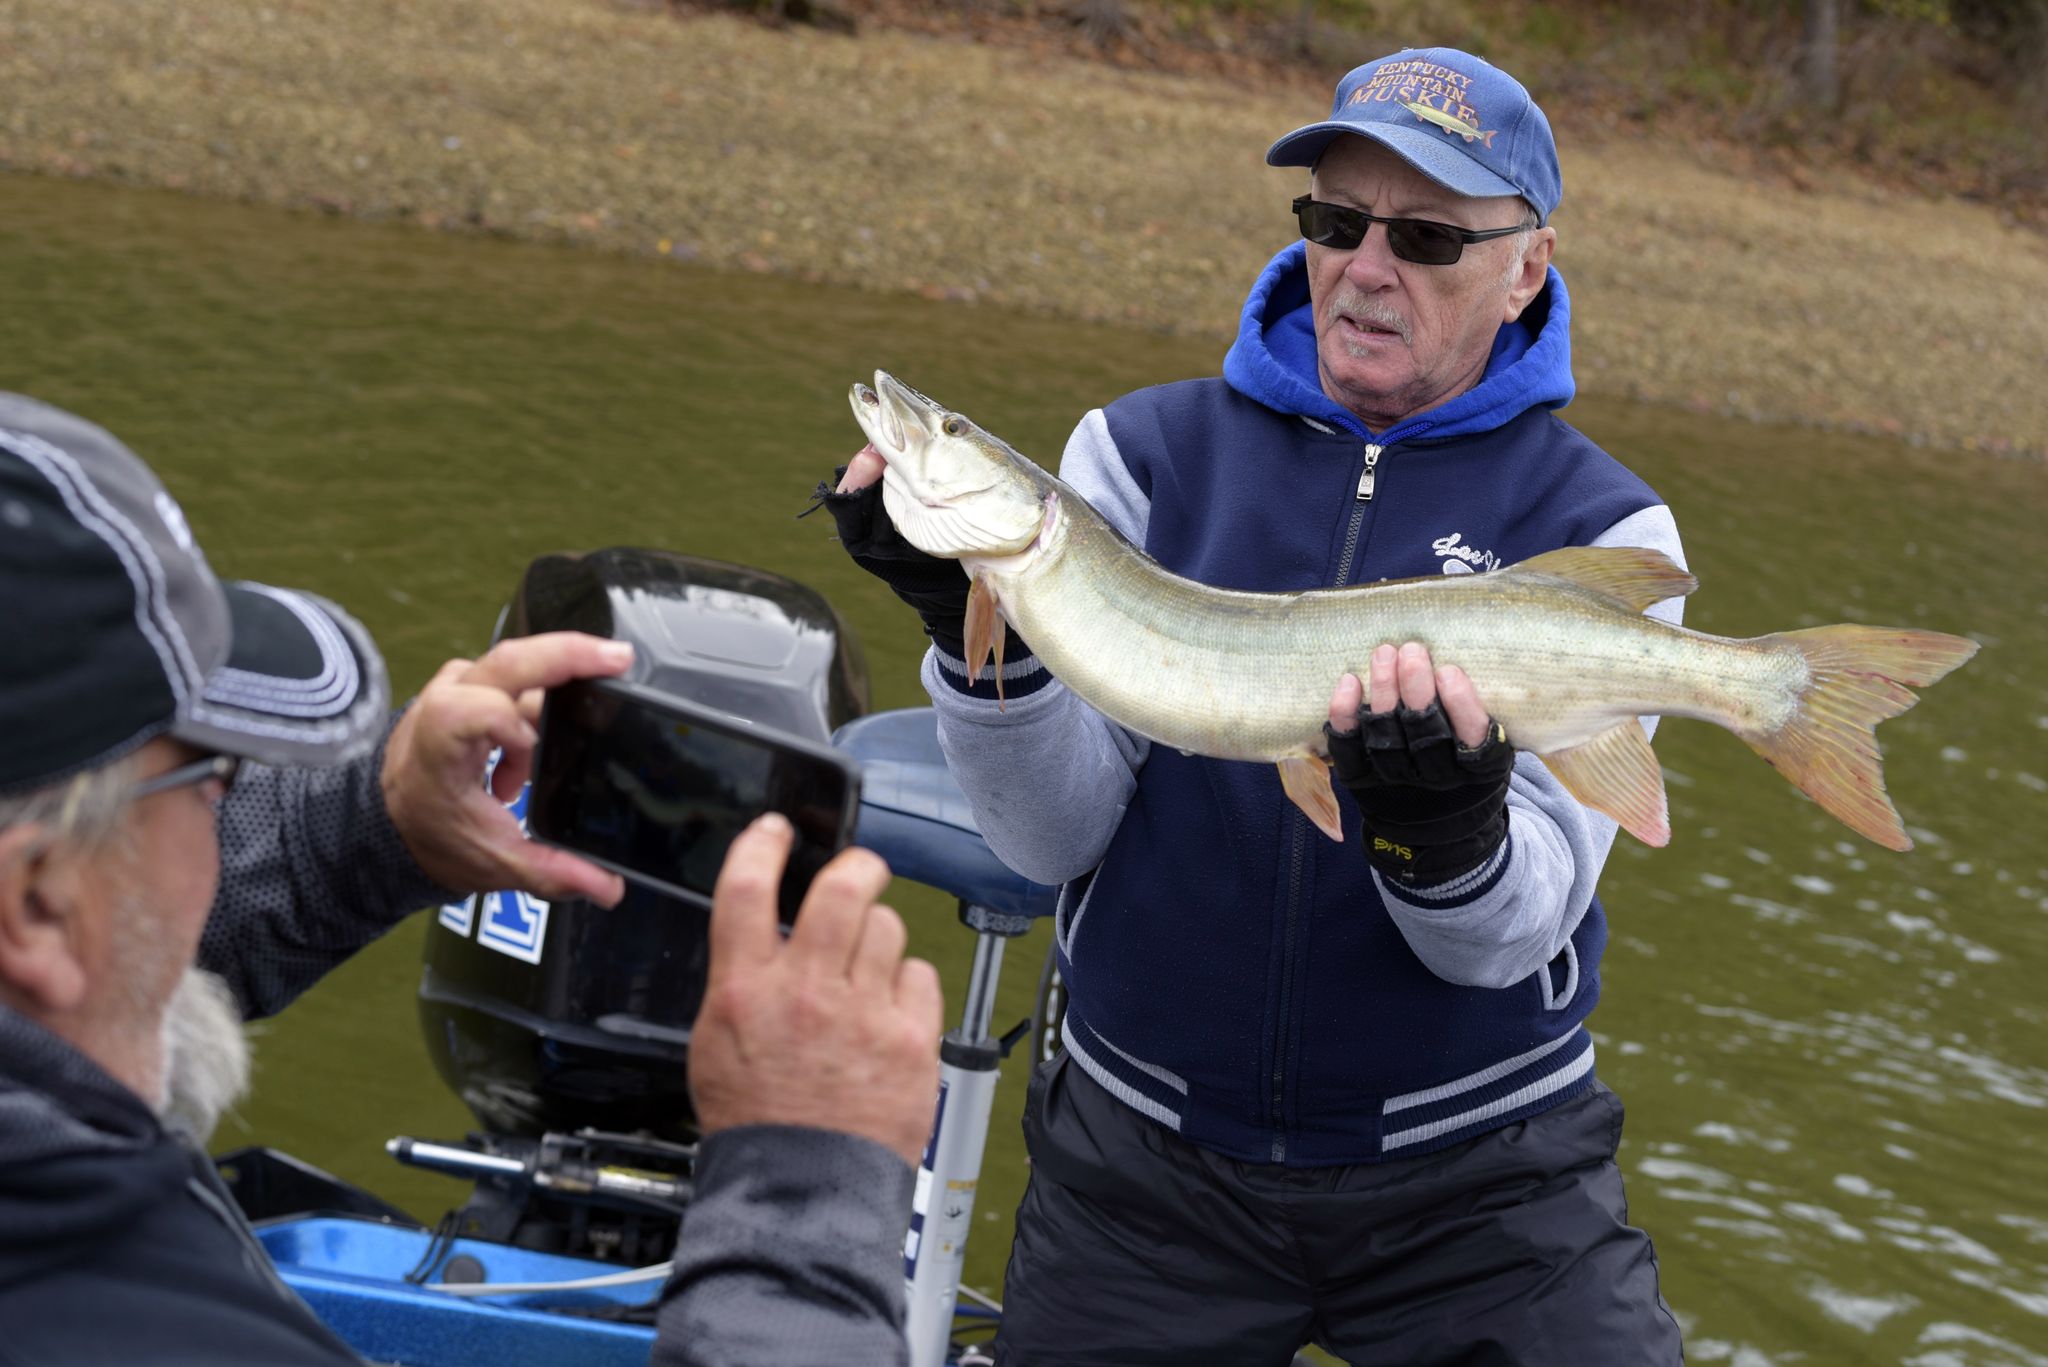 Louie Friedman shows off his catch, a 30-inch muskellunge, known locally as "muskie." Louie's guide and friend of 20 years, Tony Grant, captures a few photos before the fish is released back into the water. While anglers in Kentucky can legally keep any muskie over 30 inches, Tony's entire operation is catch-and-release. "We'd be blackballed if it got out that we let someone take a fish out of this lake," he says.